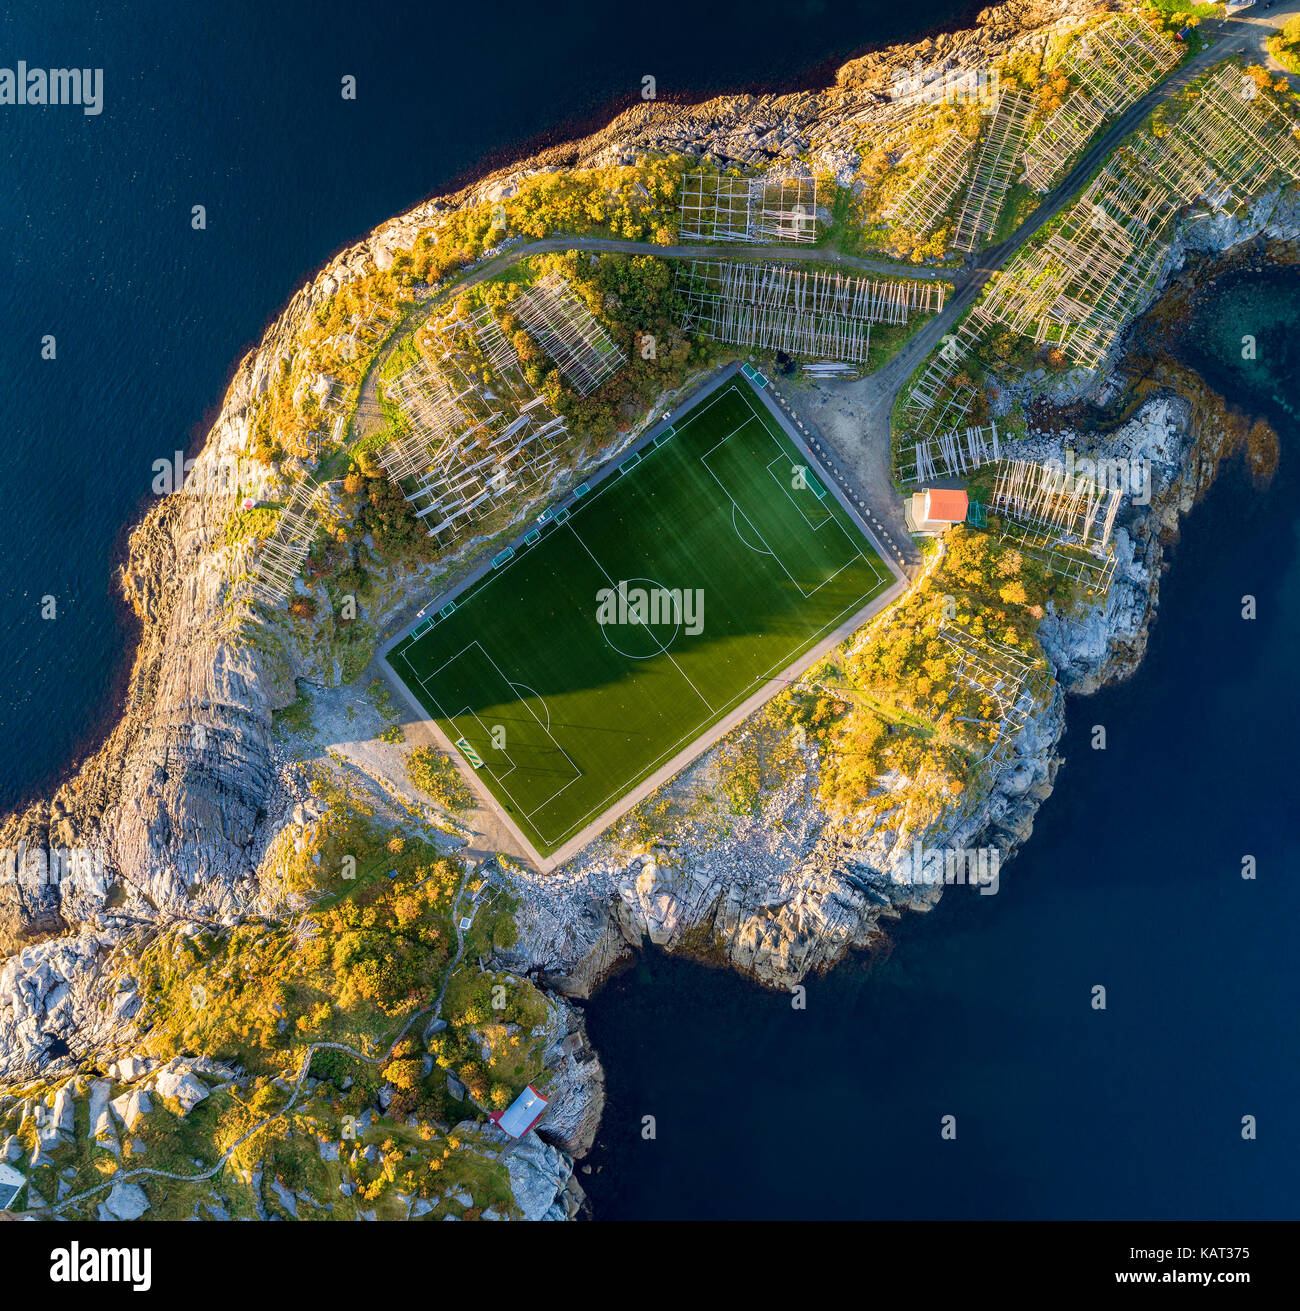 Football field in Henningsvaer from above. Henningsvaer is a fishing village located on several small islands in the Lofoten archipelago in Norway Stock Photo